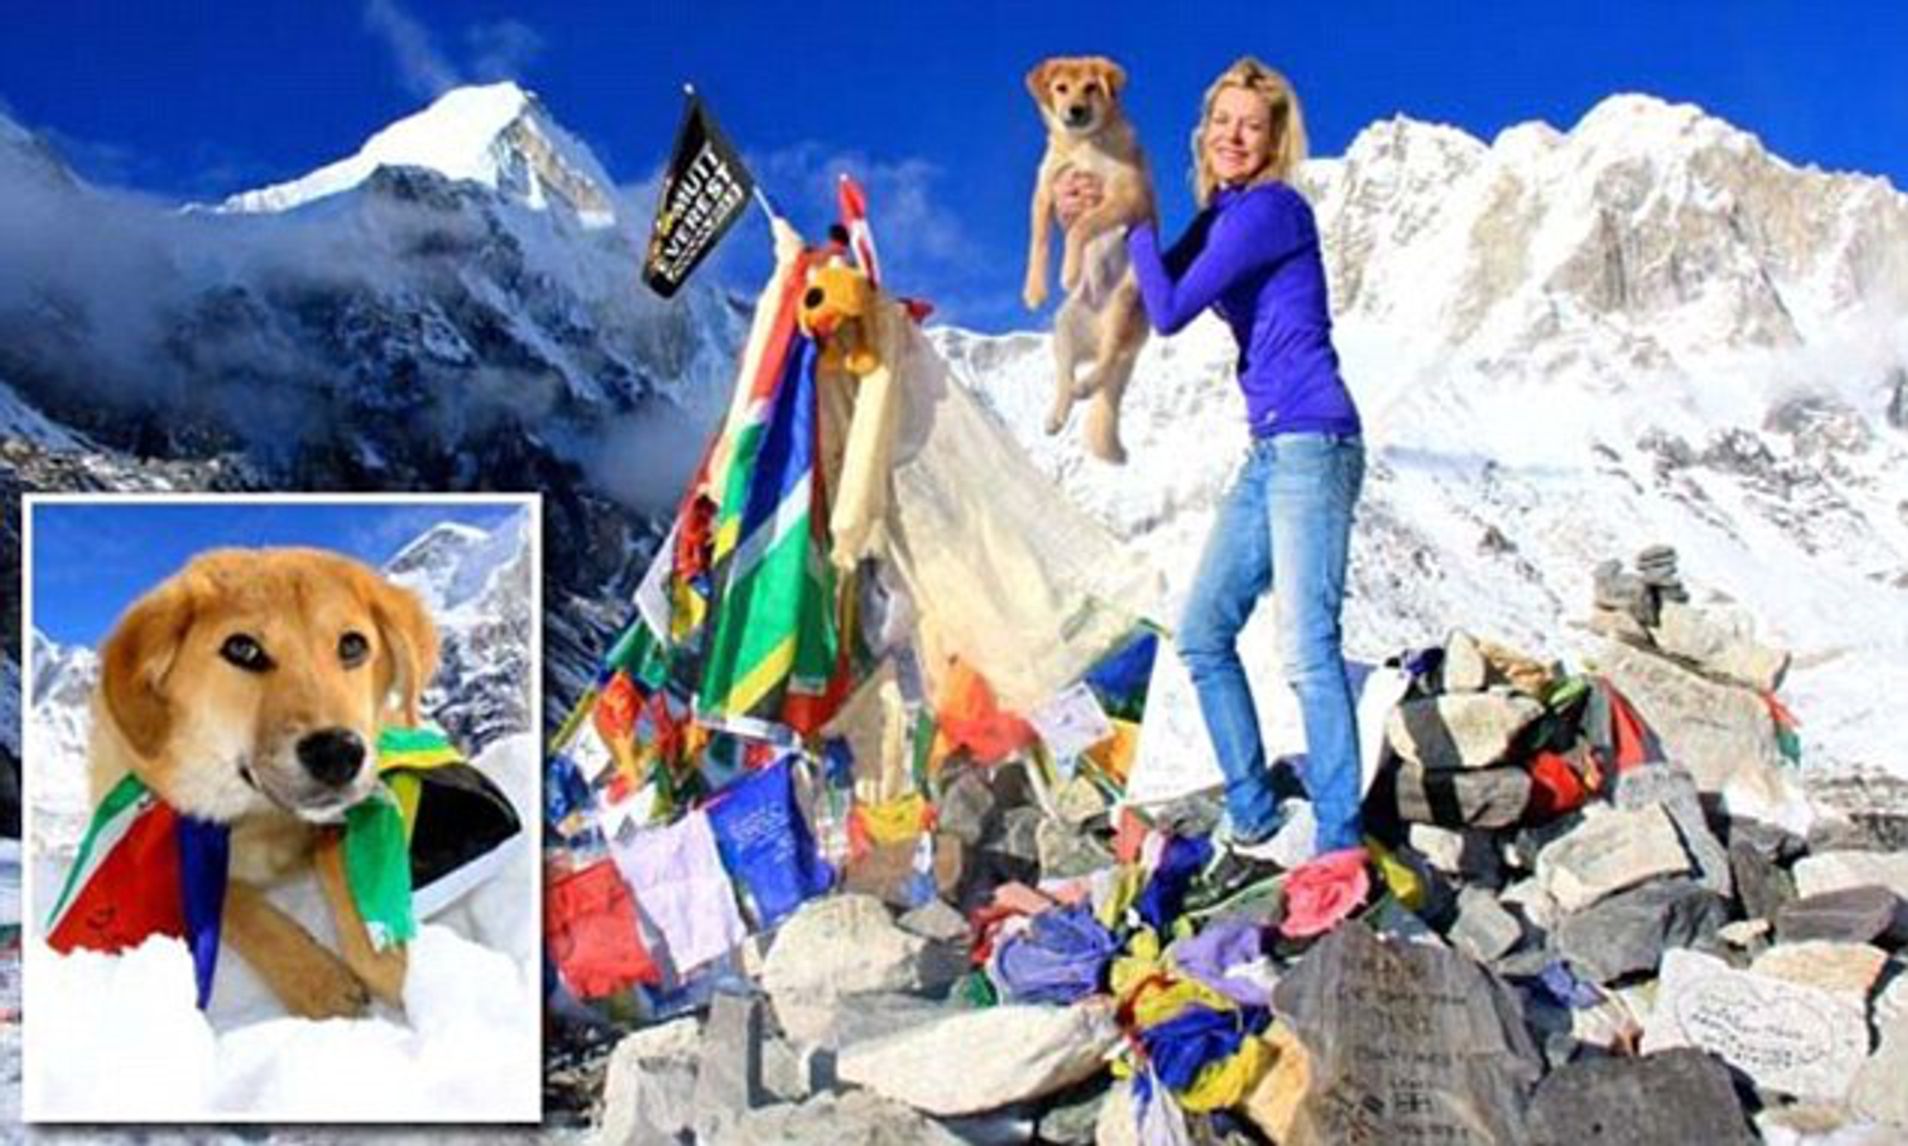 This First Documented Indian Dog Rupee Reached The Mount Everest Base Camp